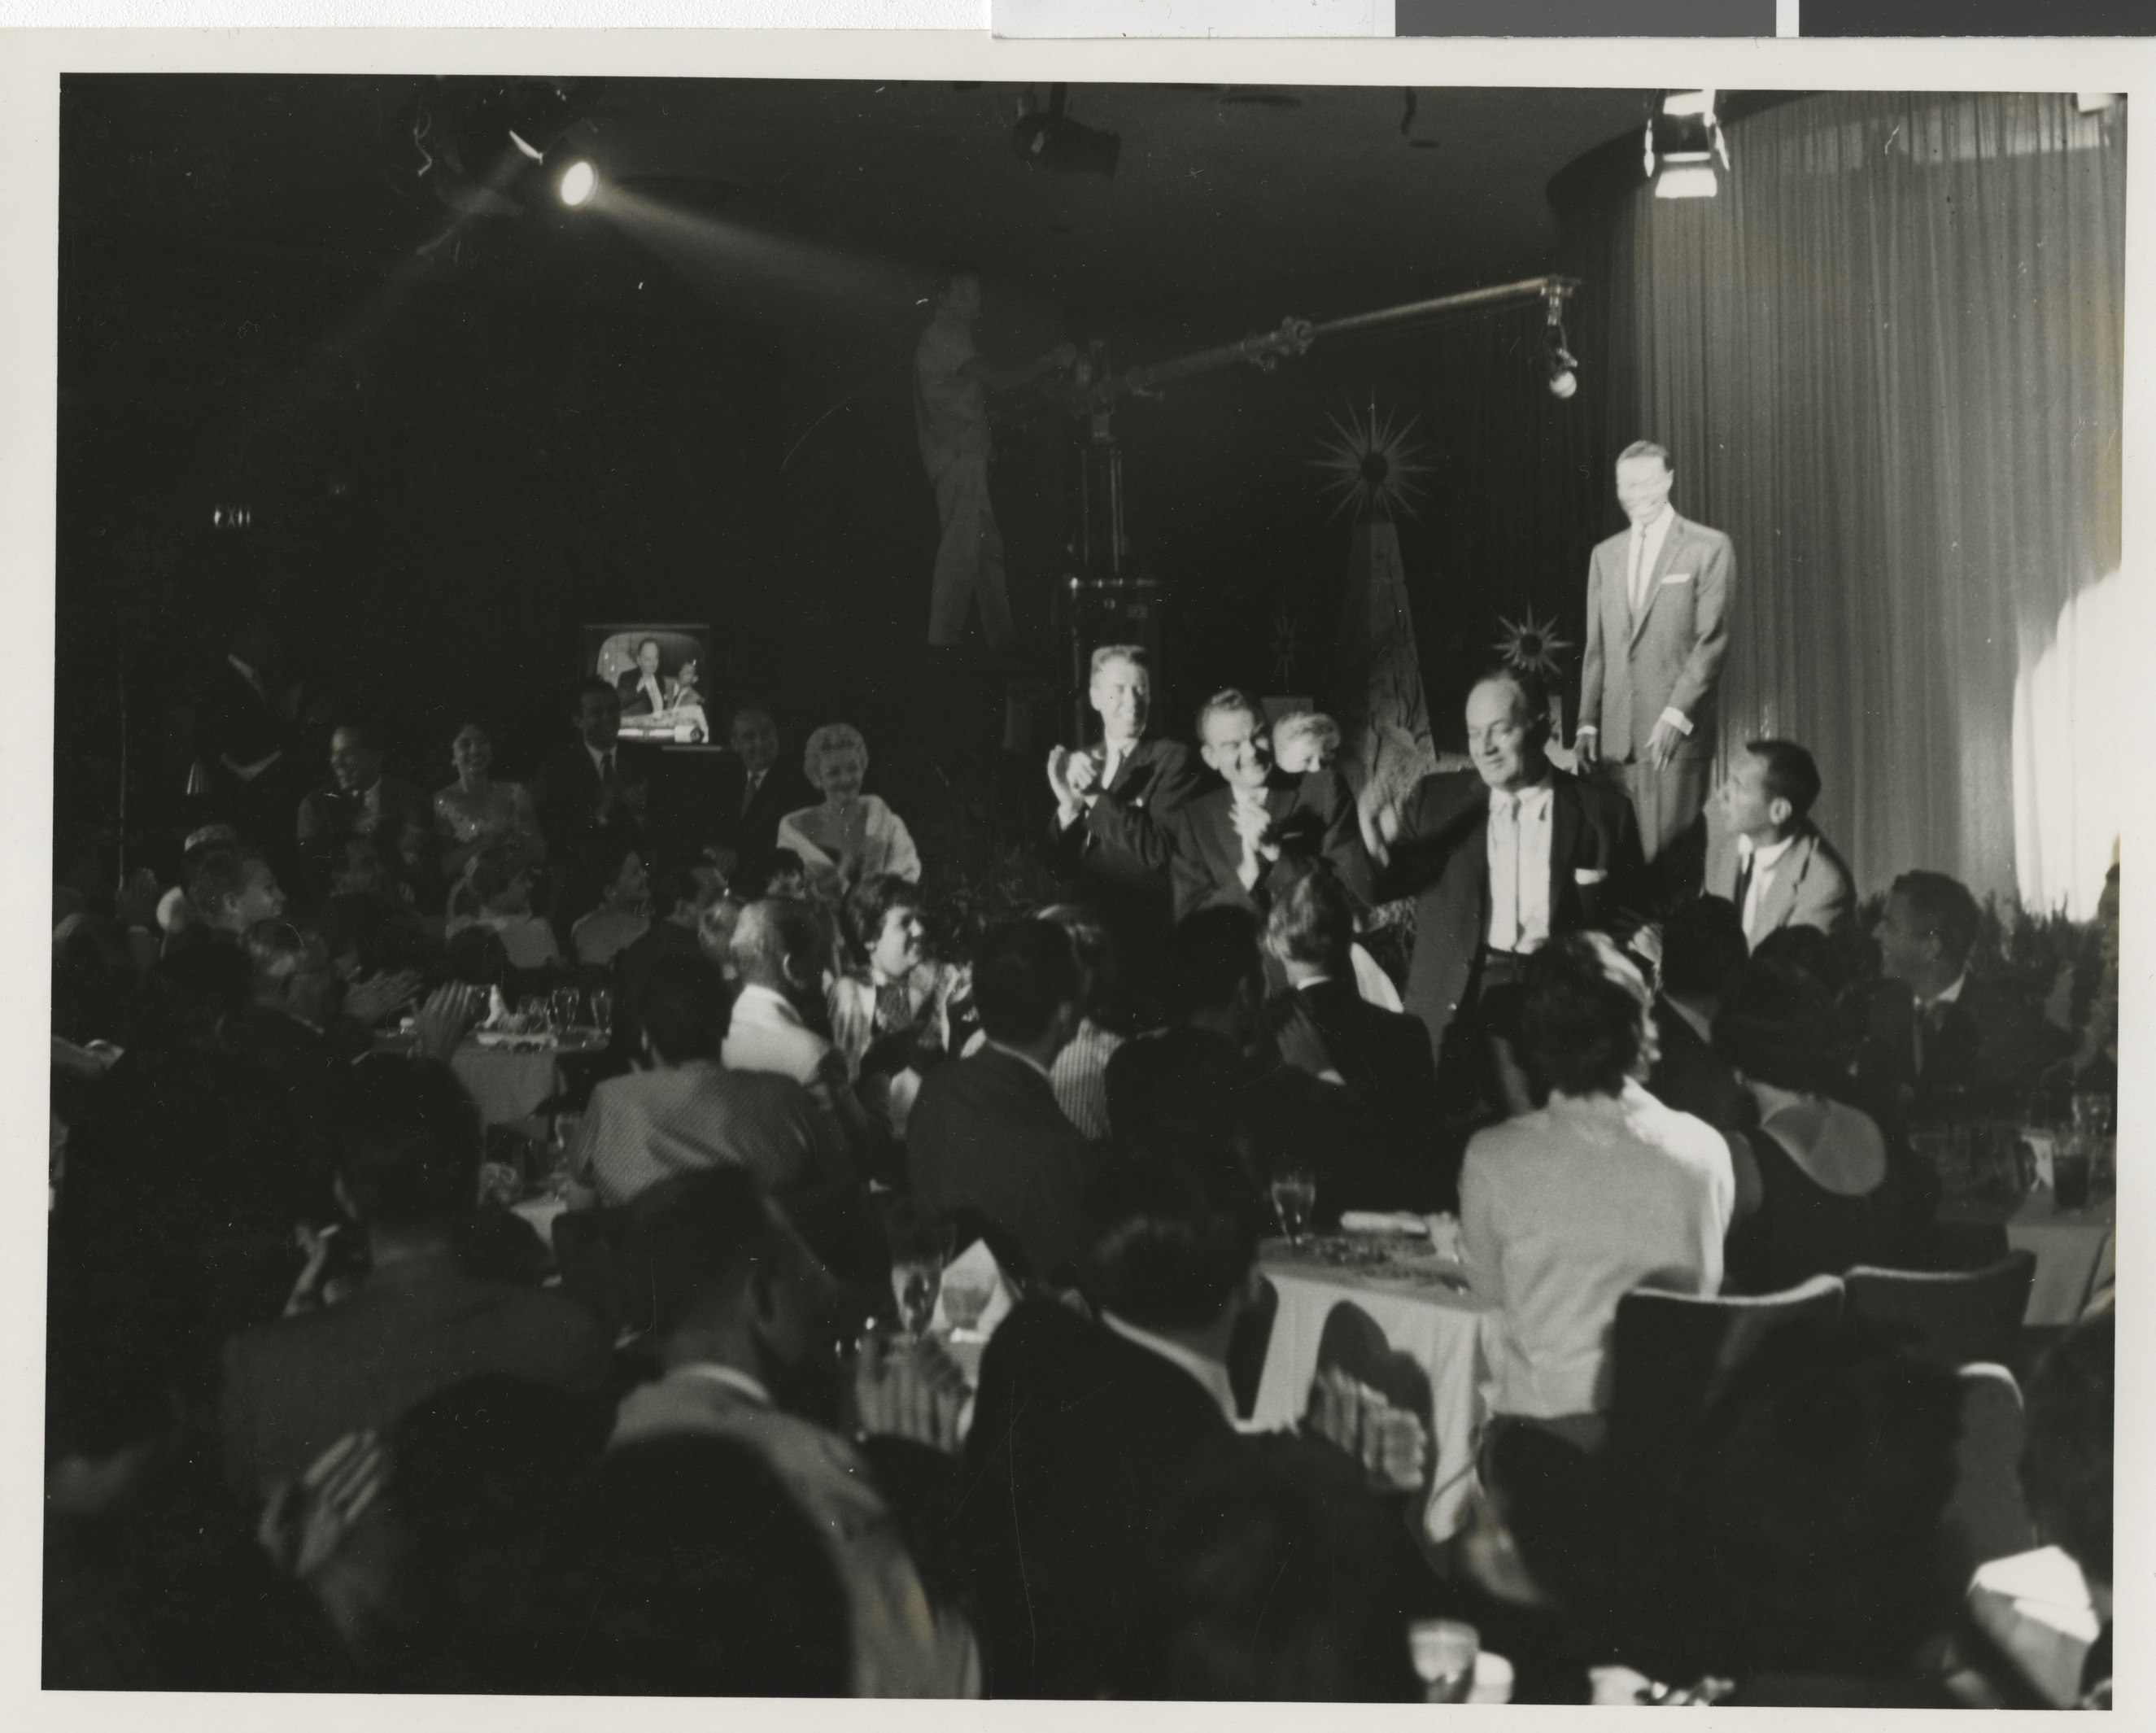 Cole onstage, image 035